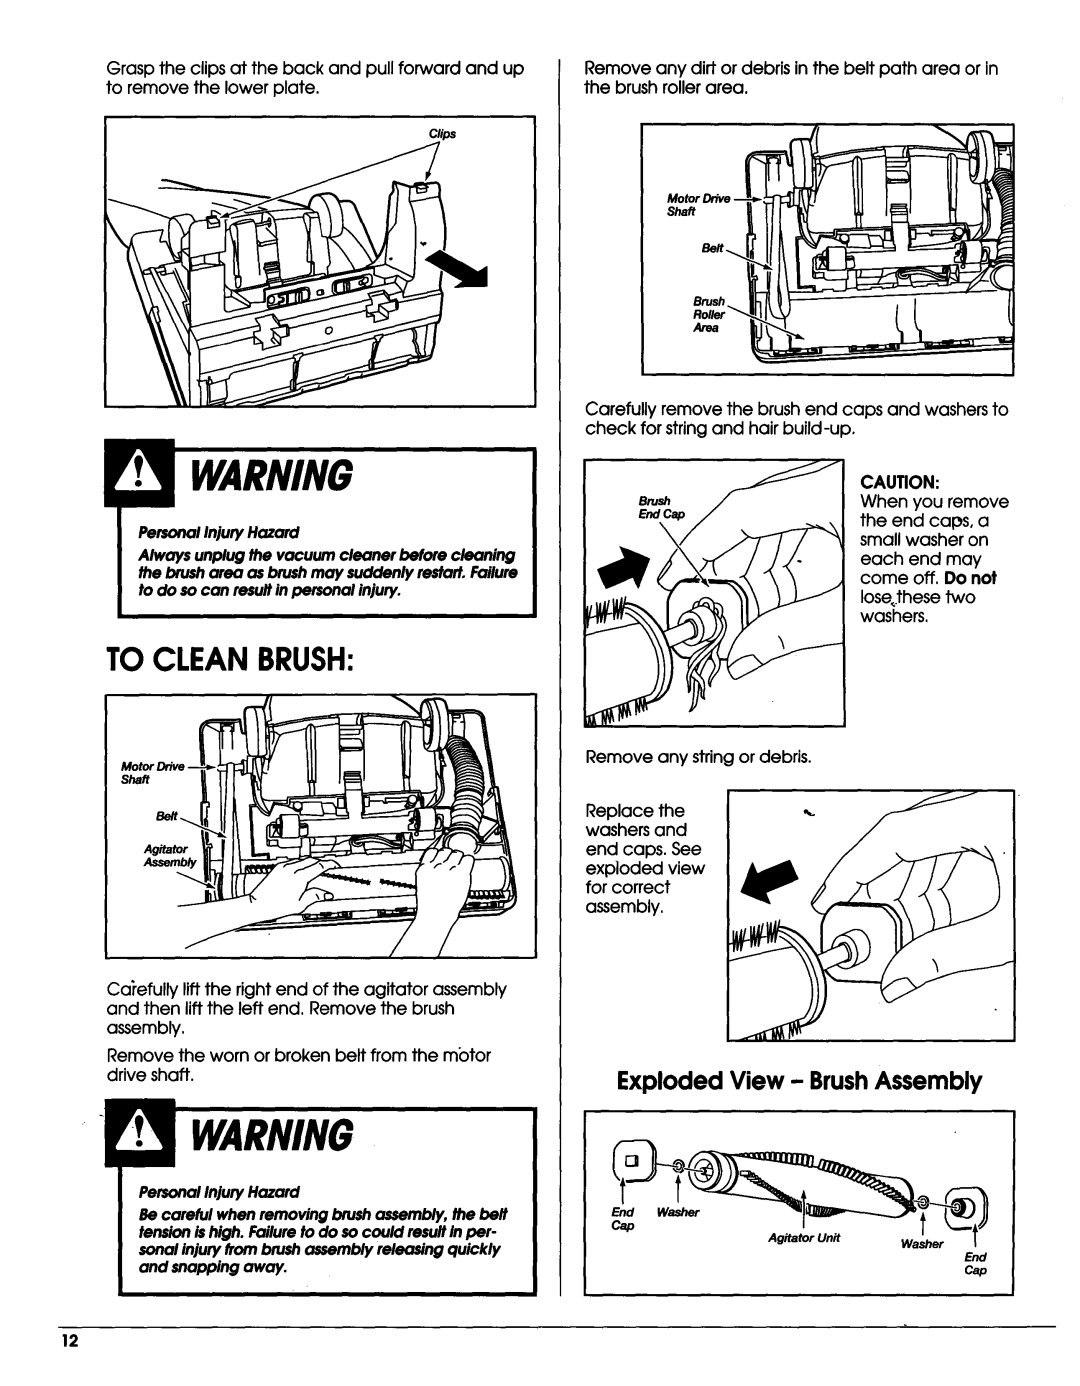 Sears Vacuum Cleaner owner manual To Cleanbrush, Exploded View - BrushAssembly, PersonalInjuryHazard, off. Do not 